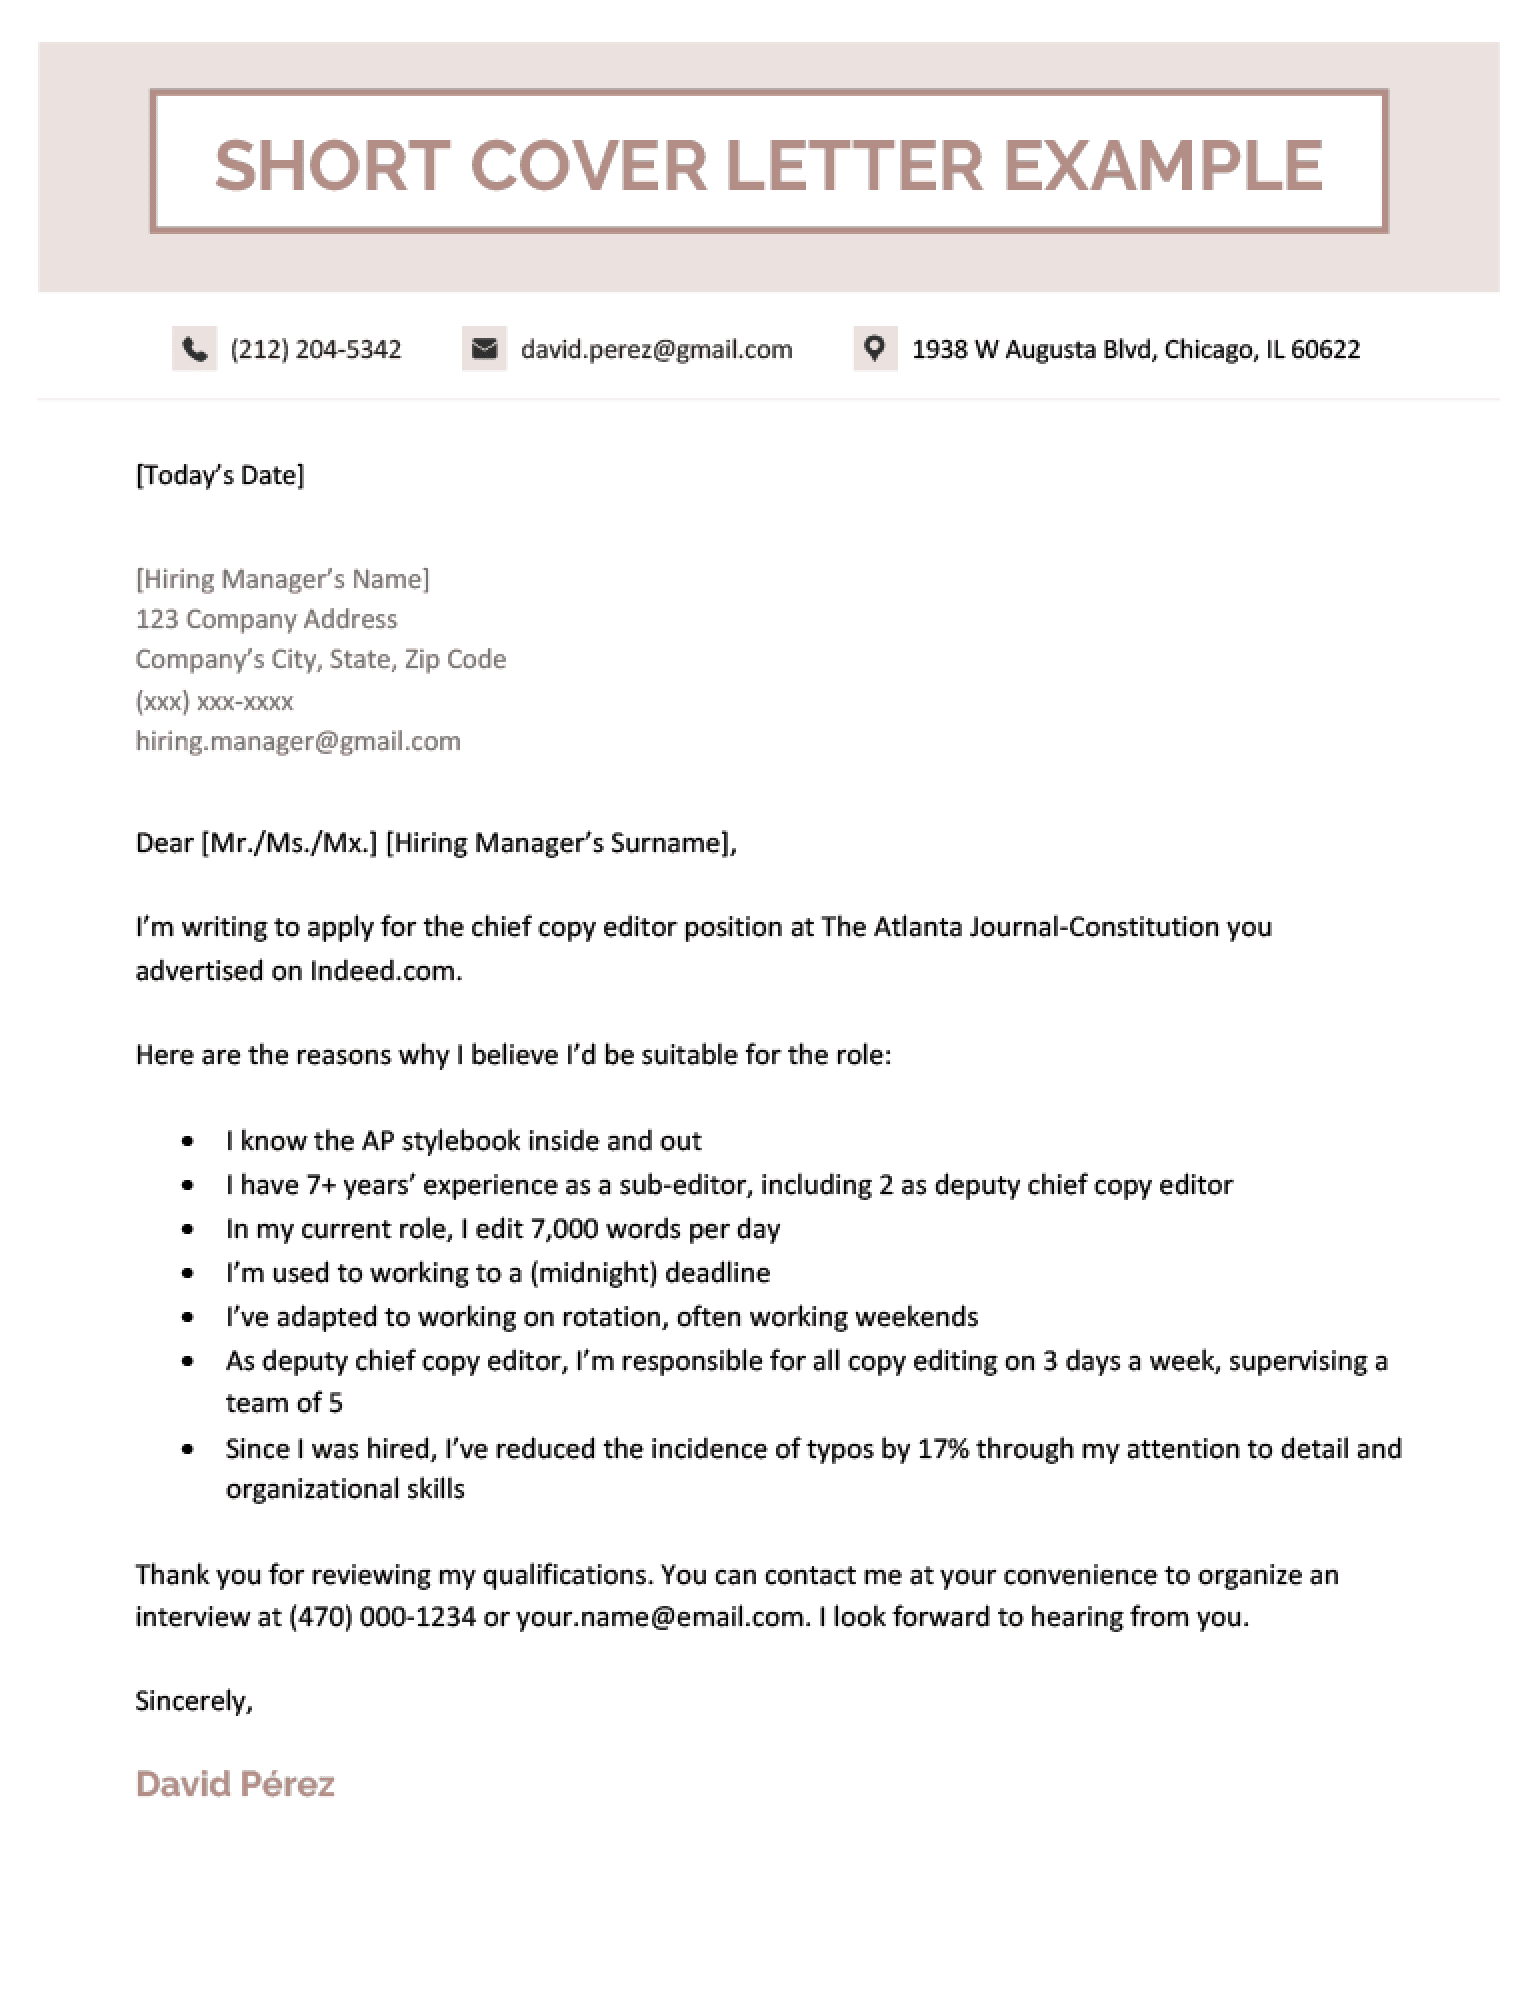 An example of a short cover letter that uses bullet points.